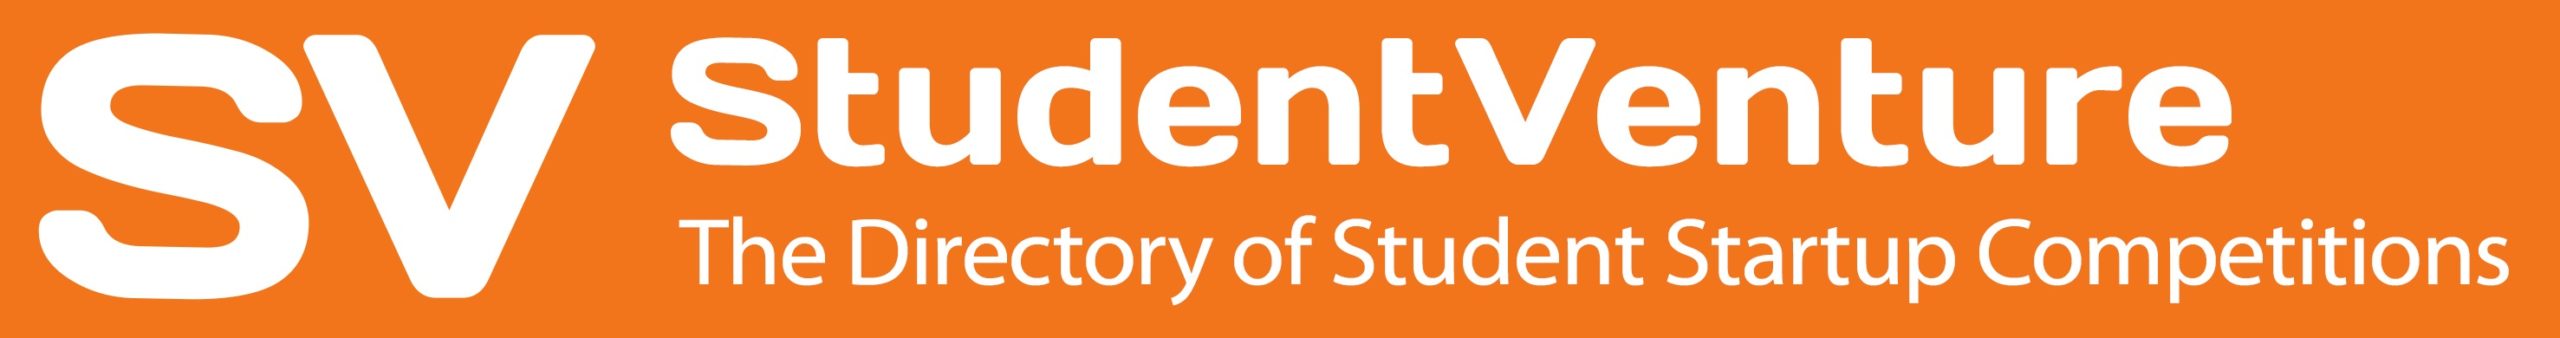 2Market Information Inc. launches StudentVentureTM – the first and only directory and database of student startup competitions